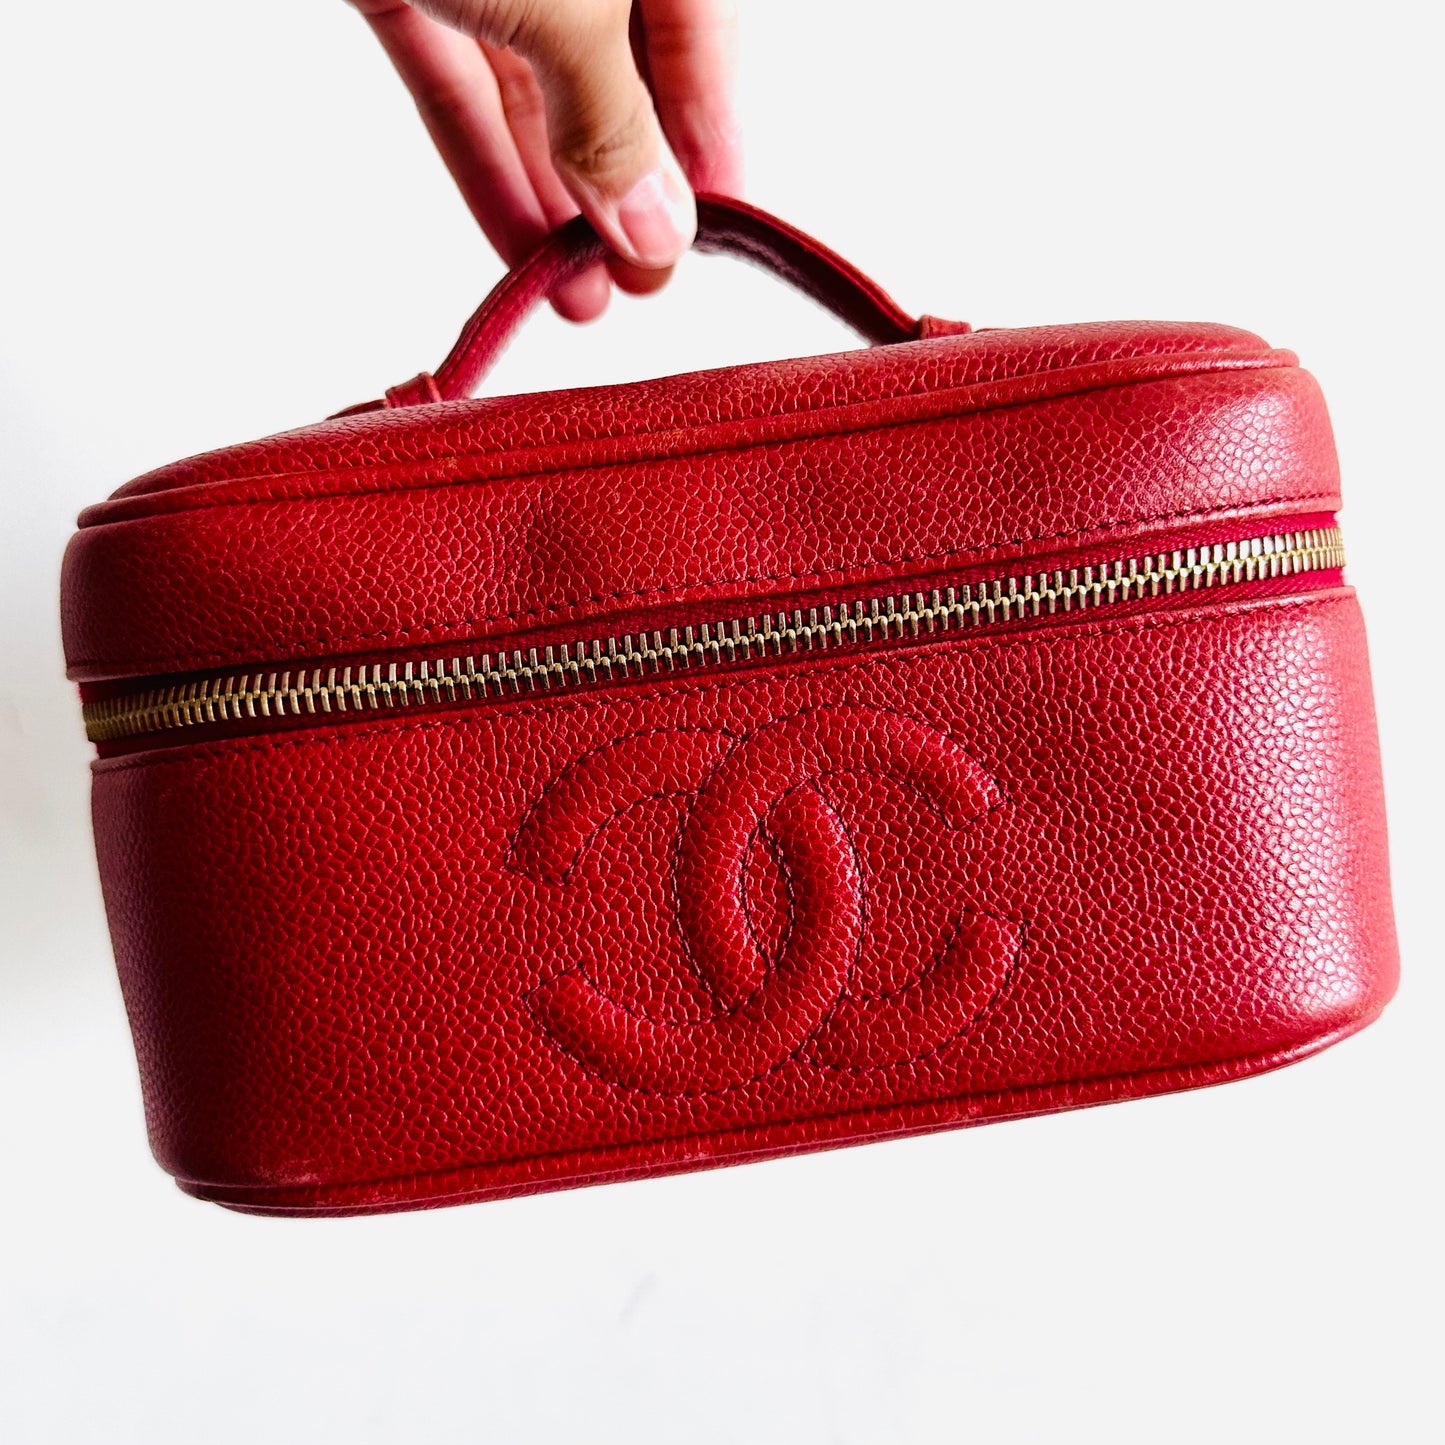 Chanel Cherry Red GHW Caviar Giant CC Logo Wide Horizontal Vanity Case Vintage Top Handle Bag 3s